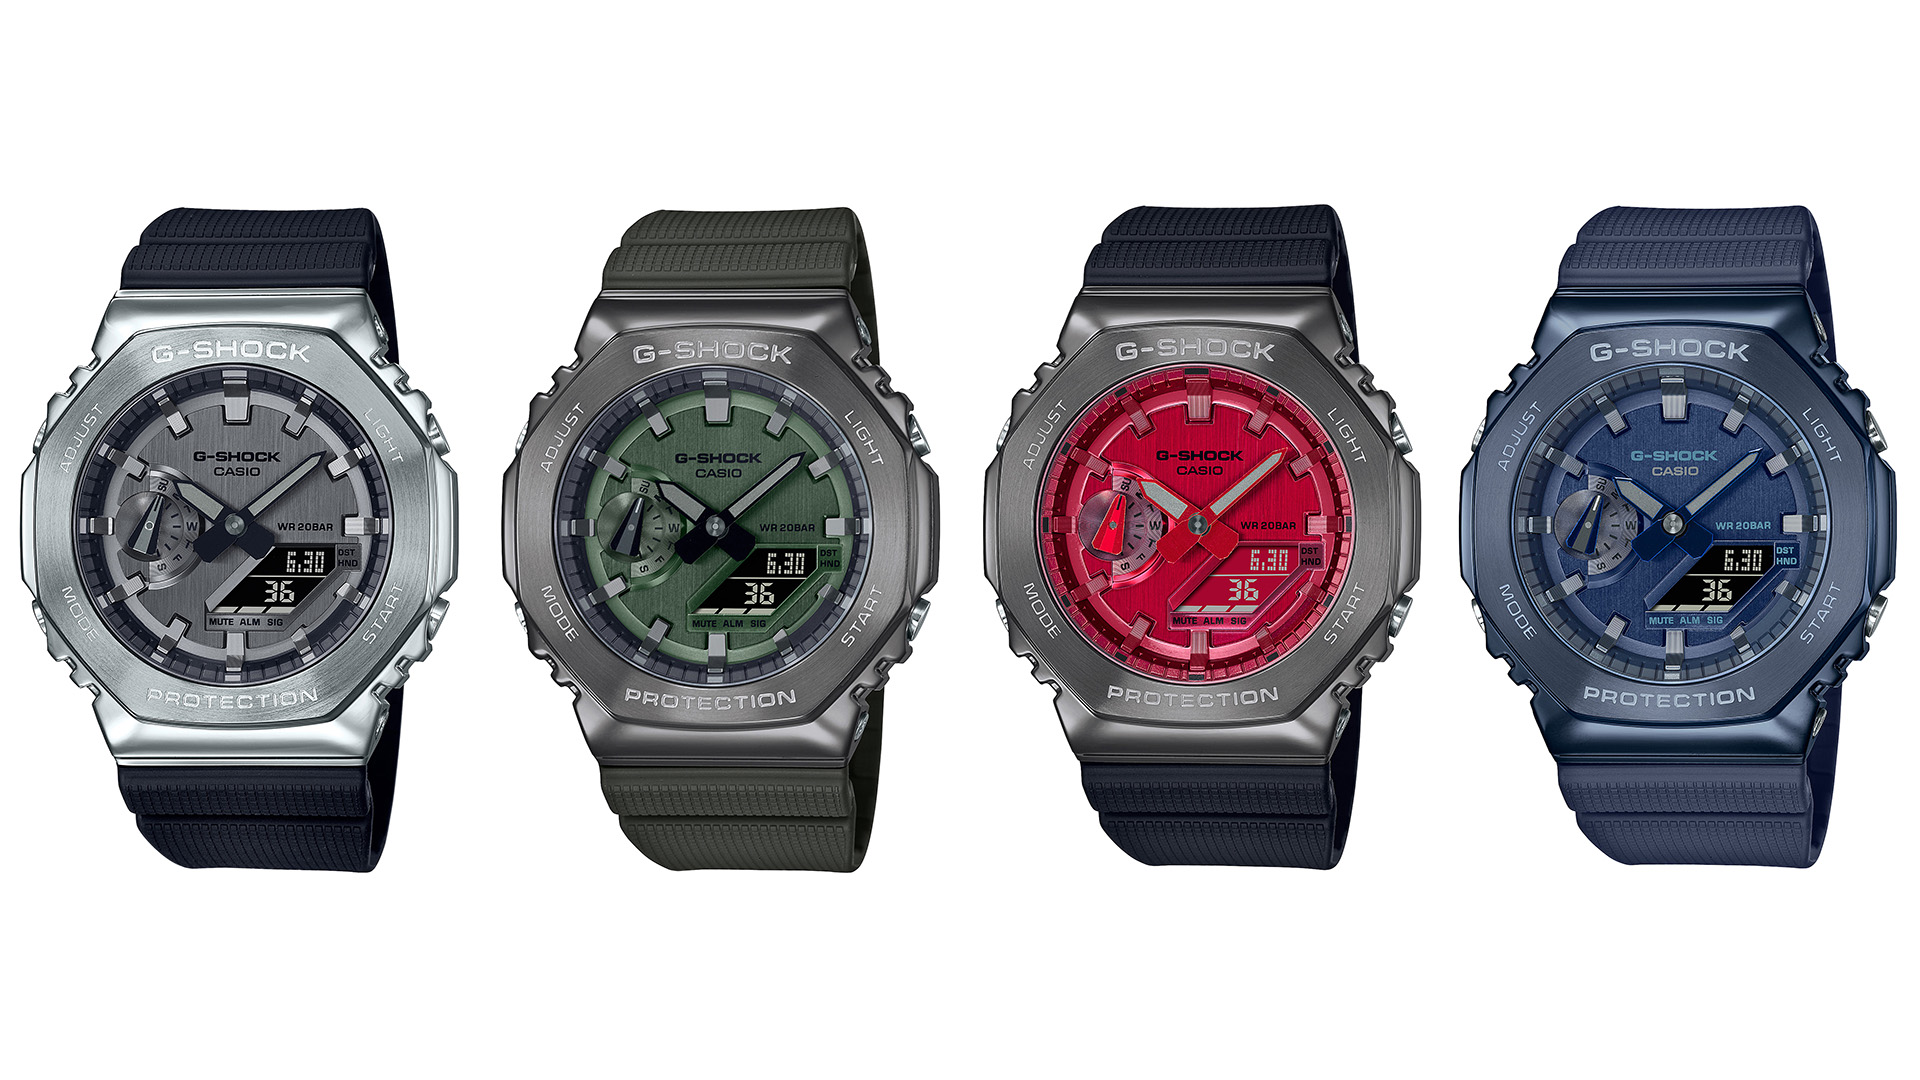 | GM2100 Watch Series aBlogtoWatch Metal-Covered Casio G-Shock Announces